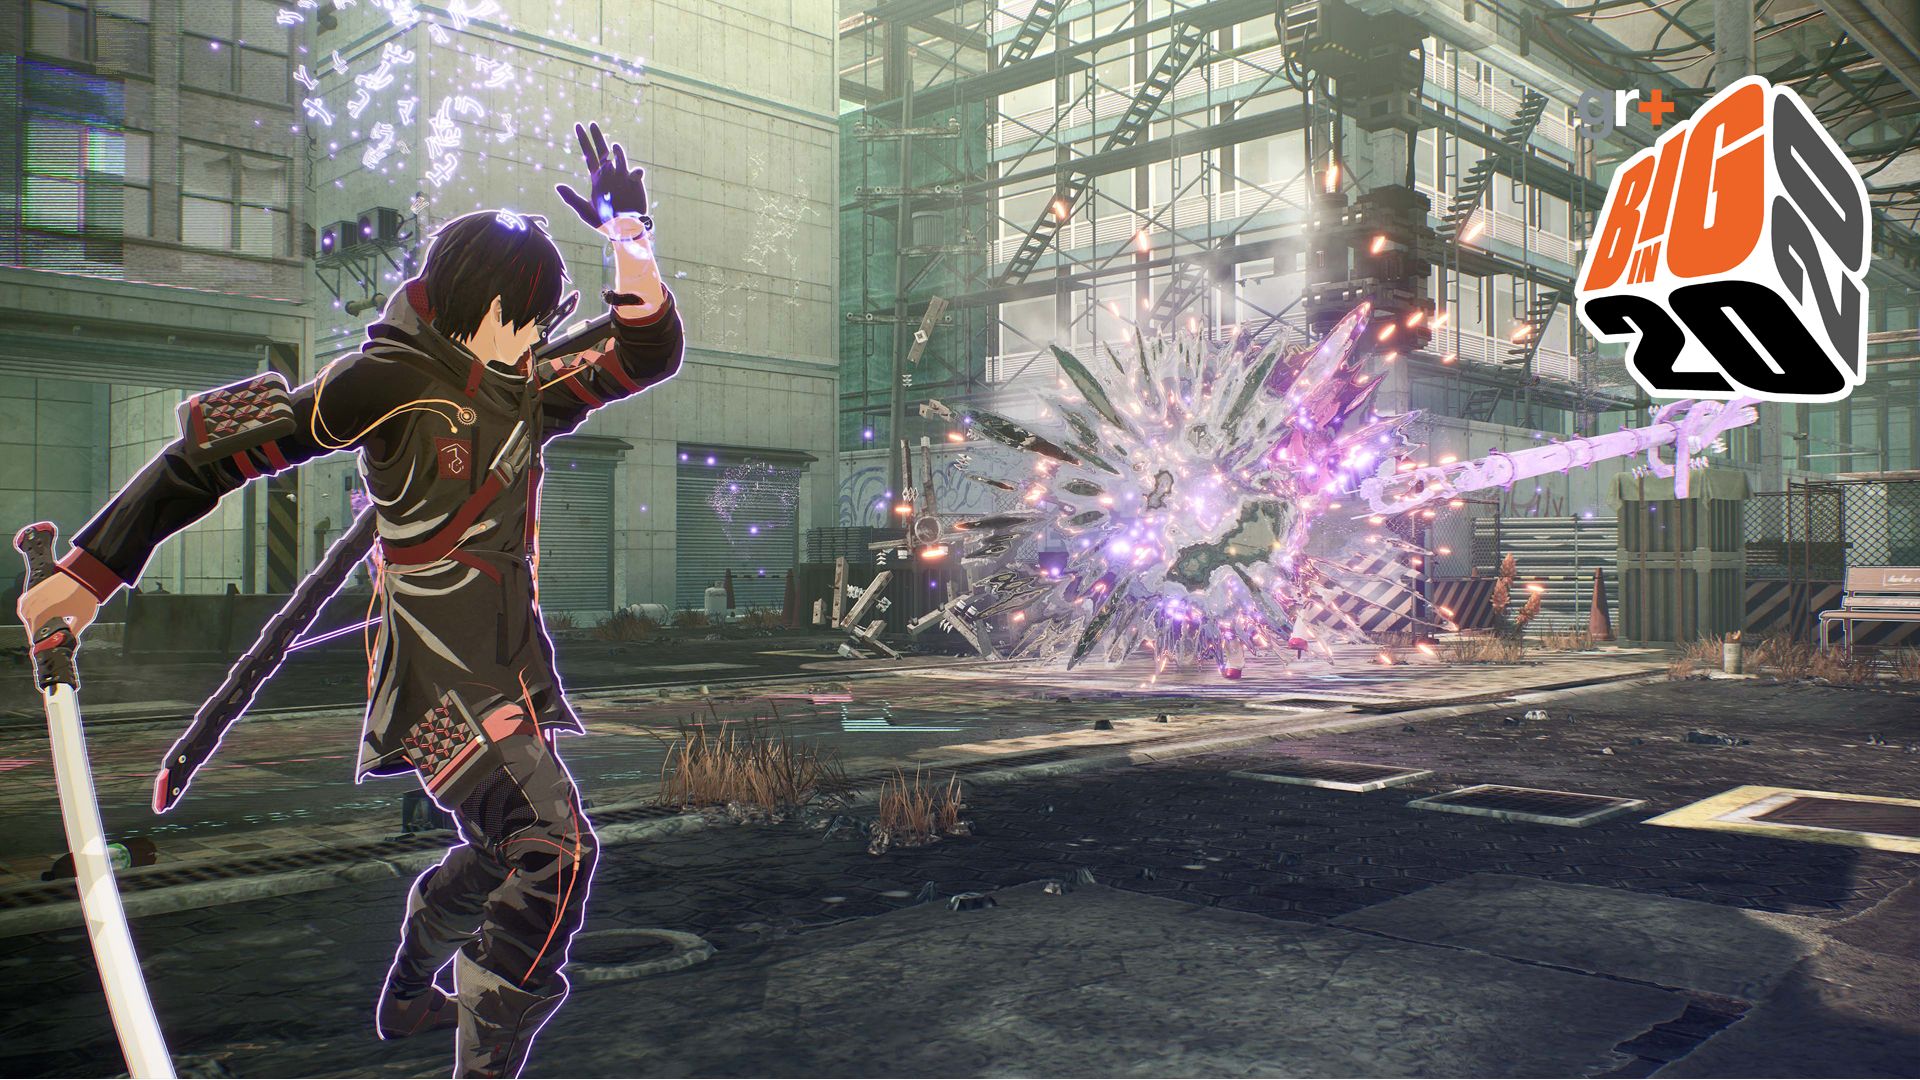 Big in 2020: Scarlet Nexus is worlds apart from the JRPGs of Bandai Namco's past